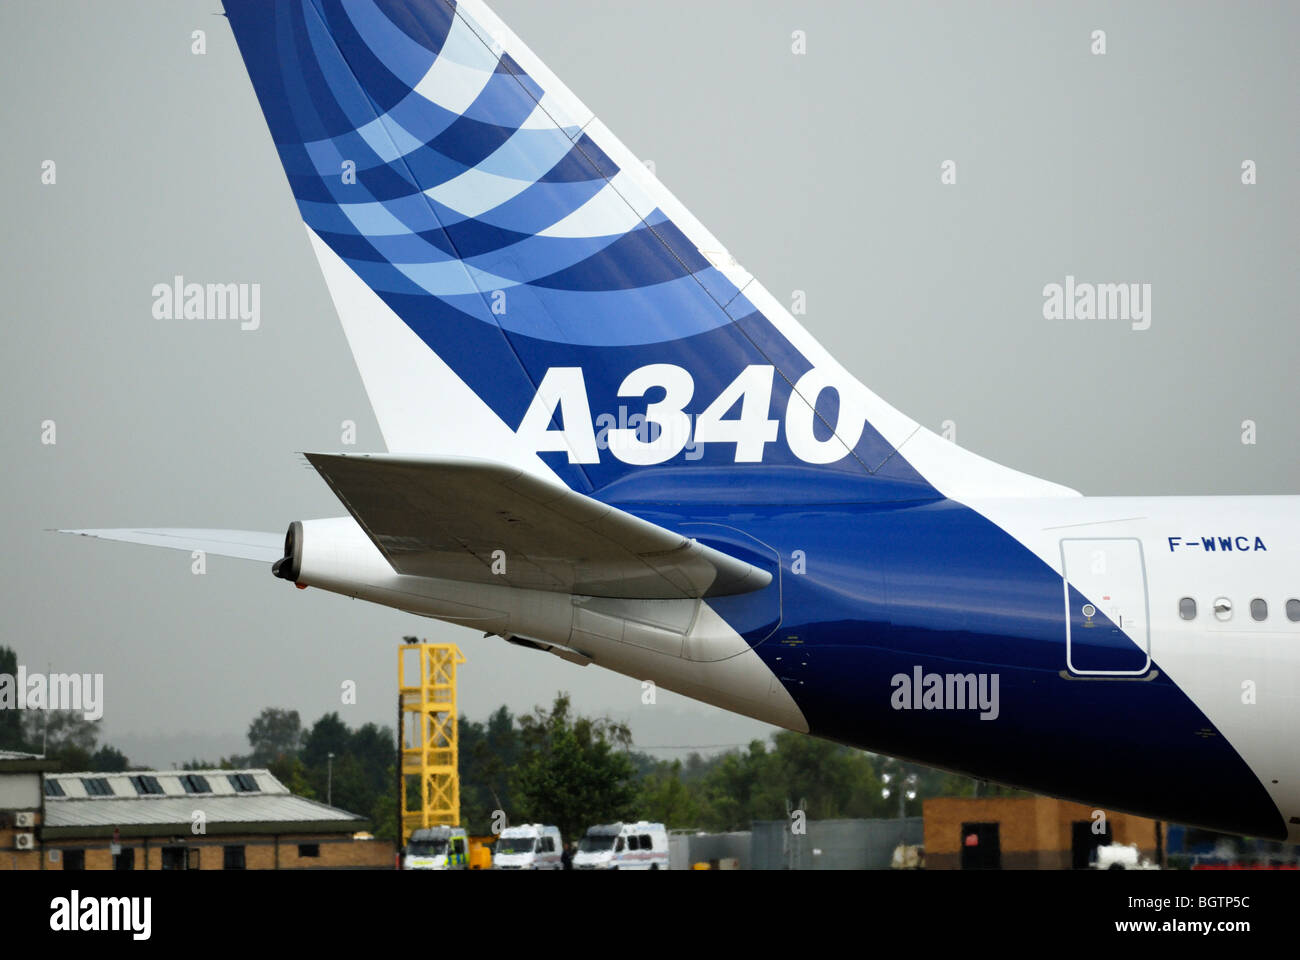 Airbus A340 Tail Fin close up Stock Photo